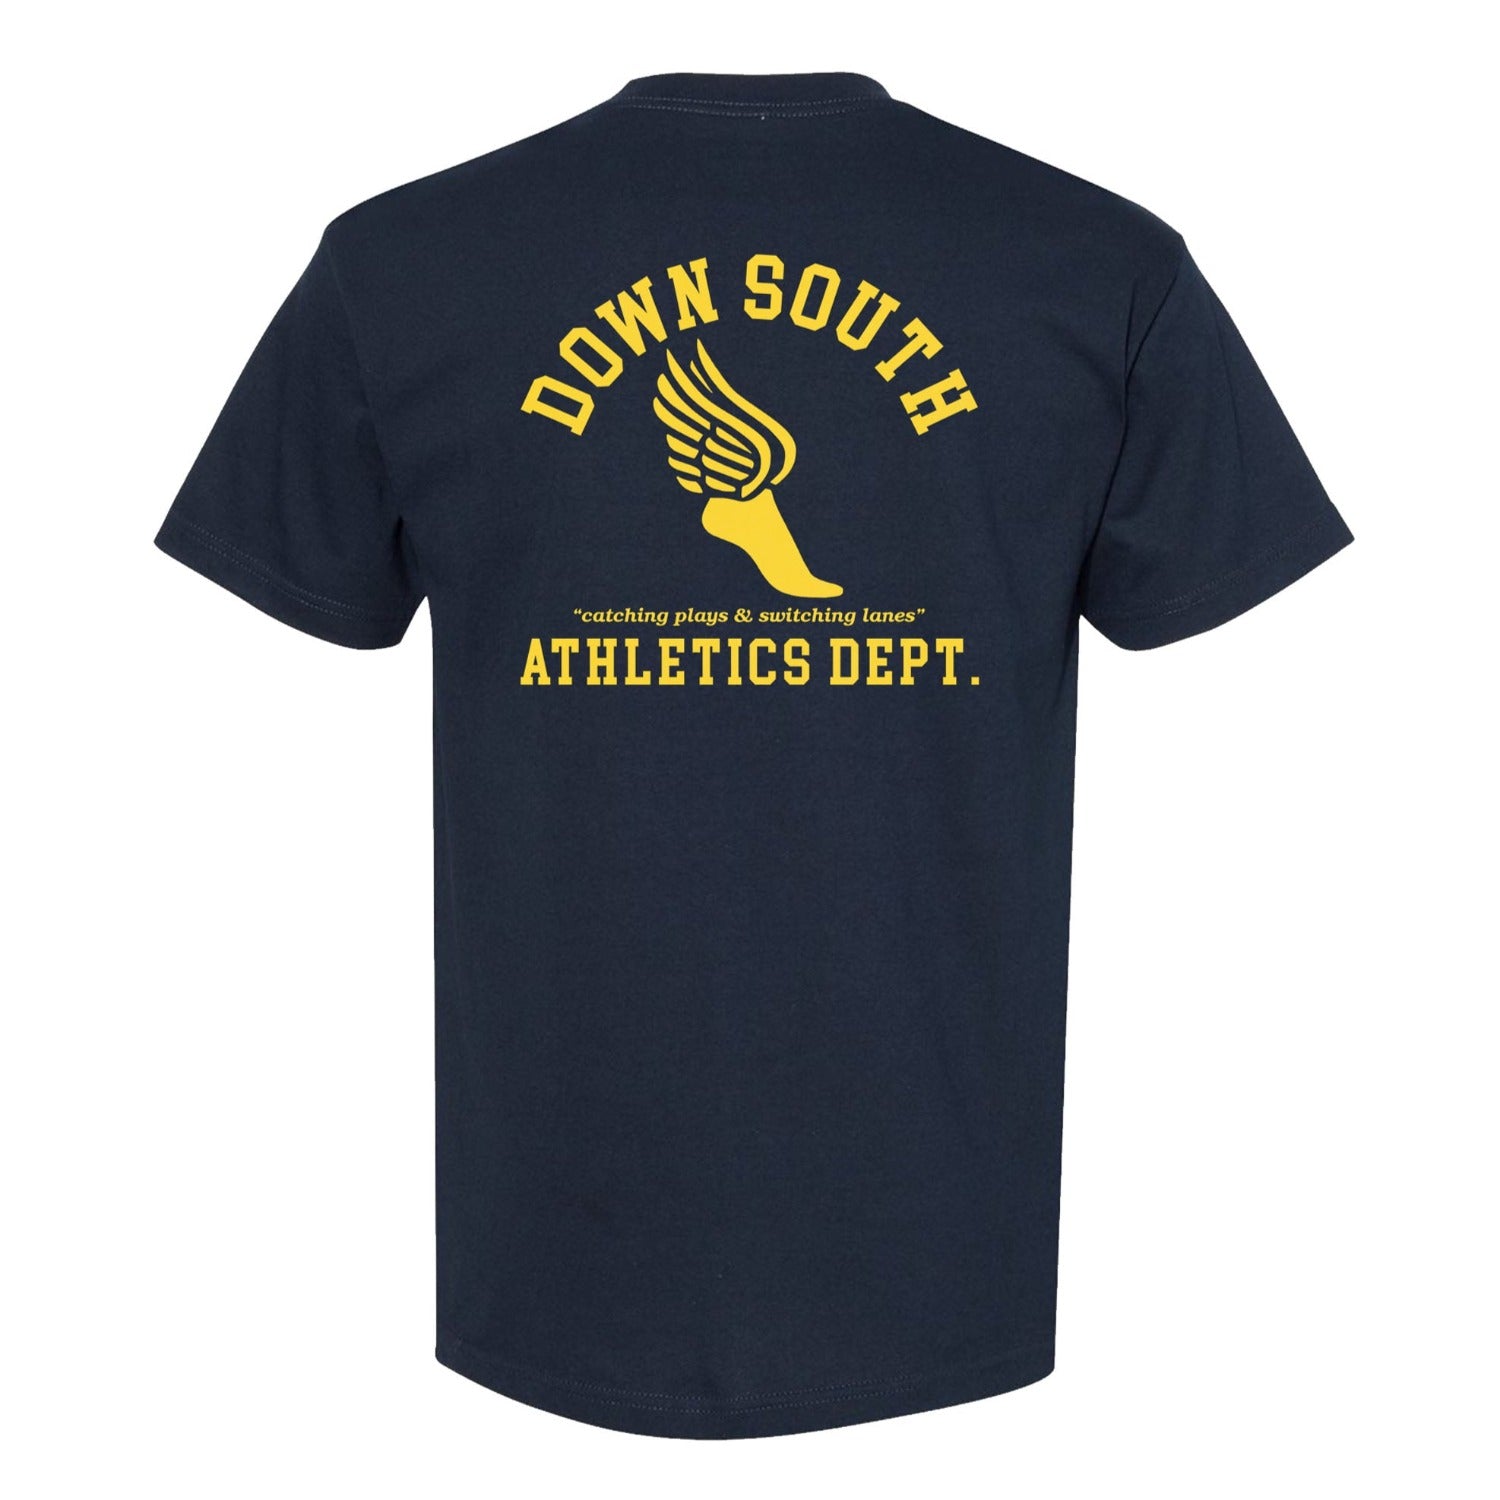 Down South Athletics Department. Down South Athl Dept Tee